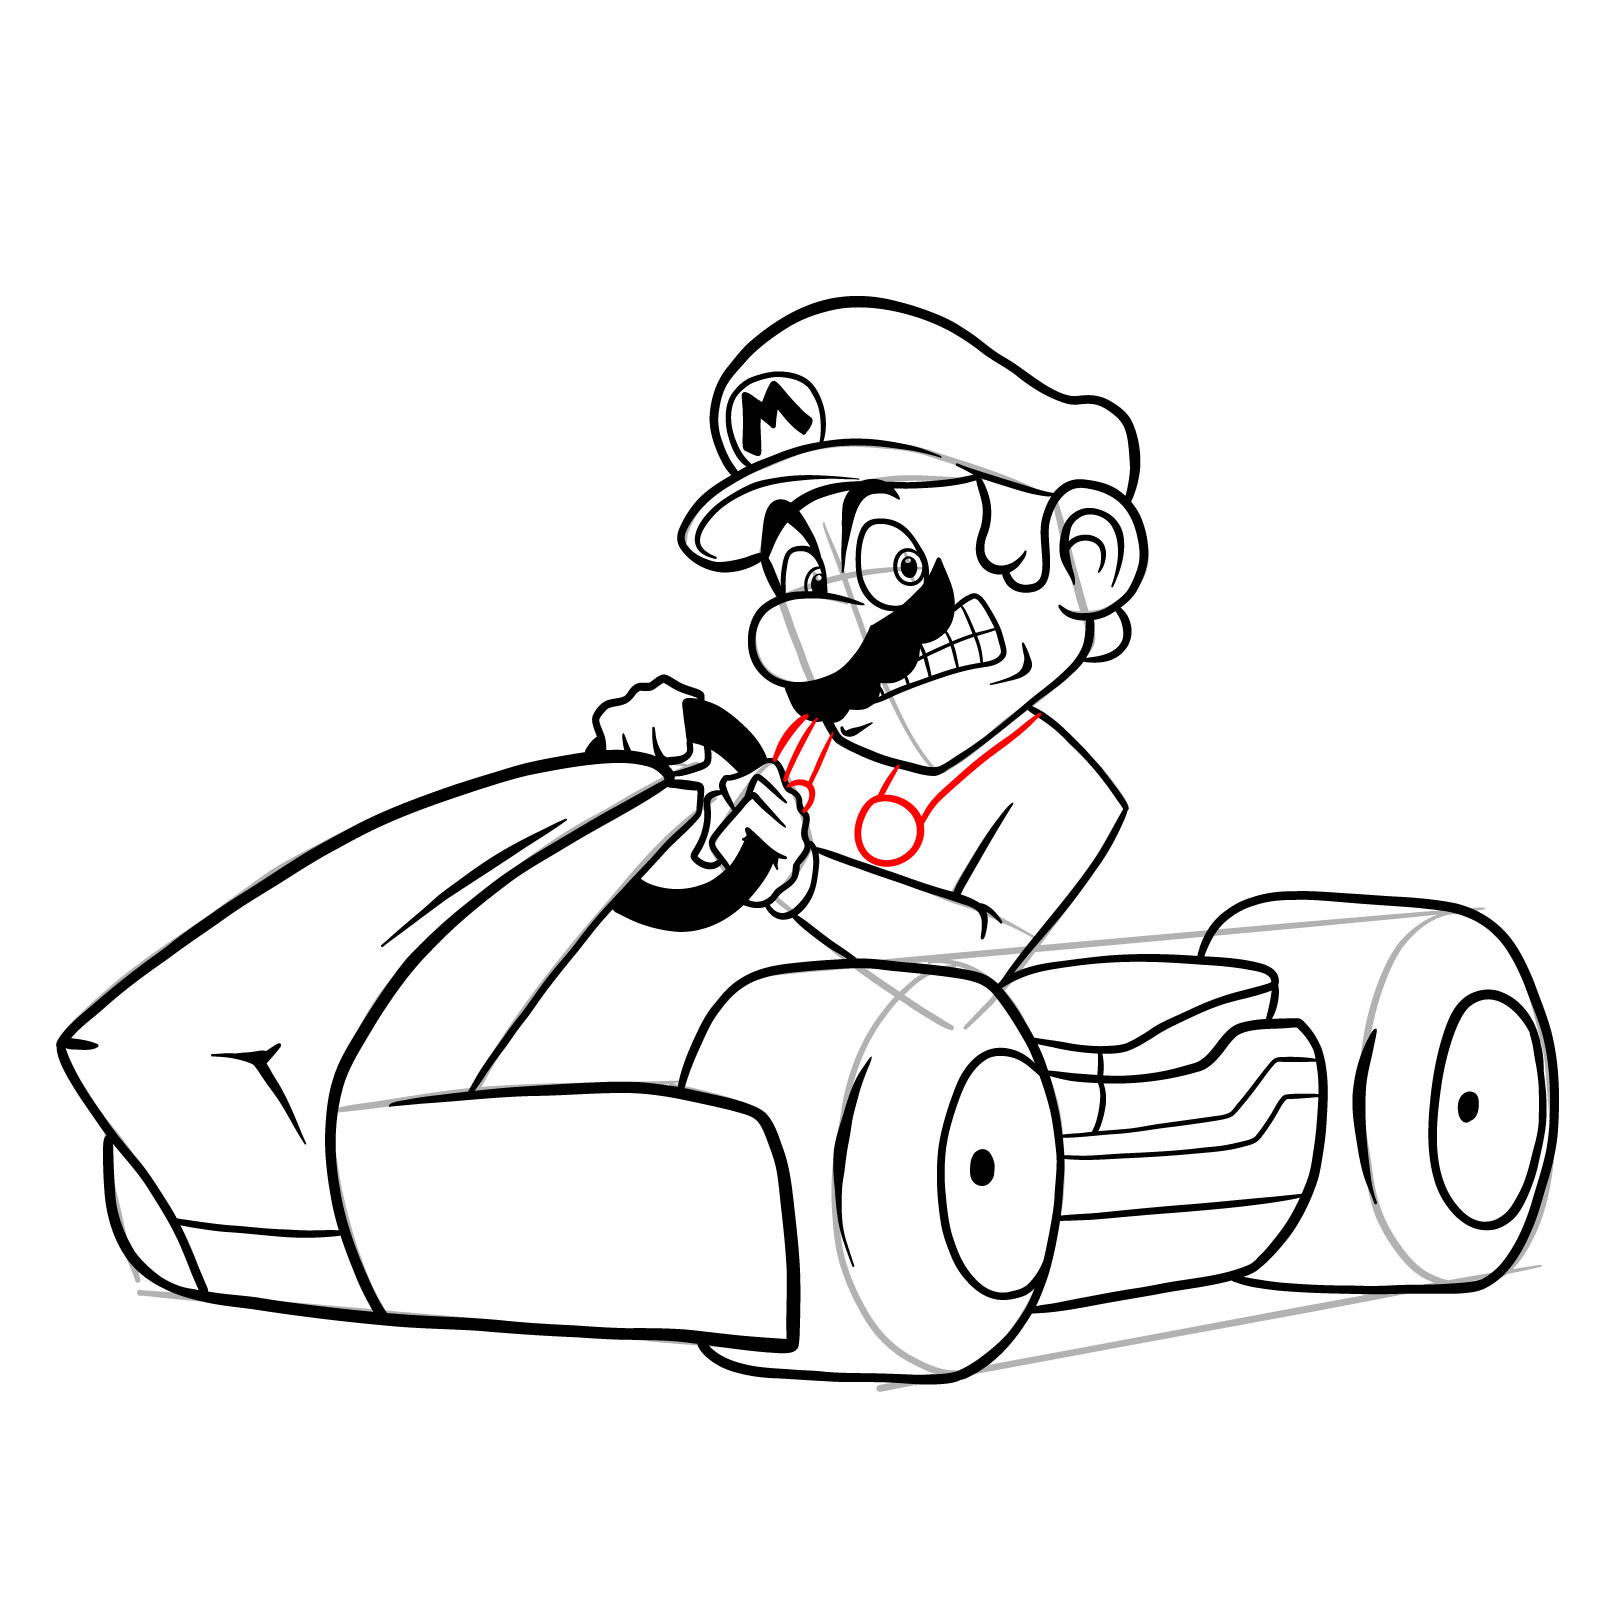 How to draw Race Traitors Mario - step 34